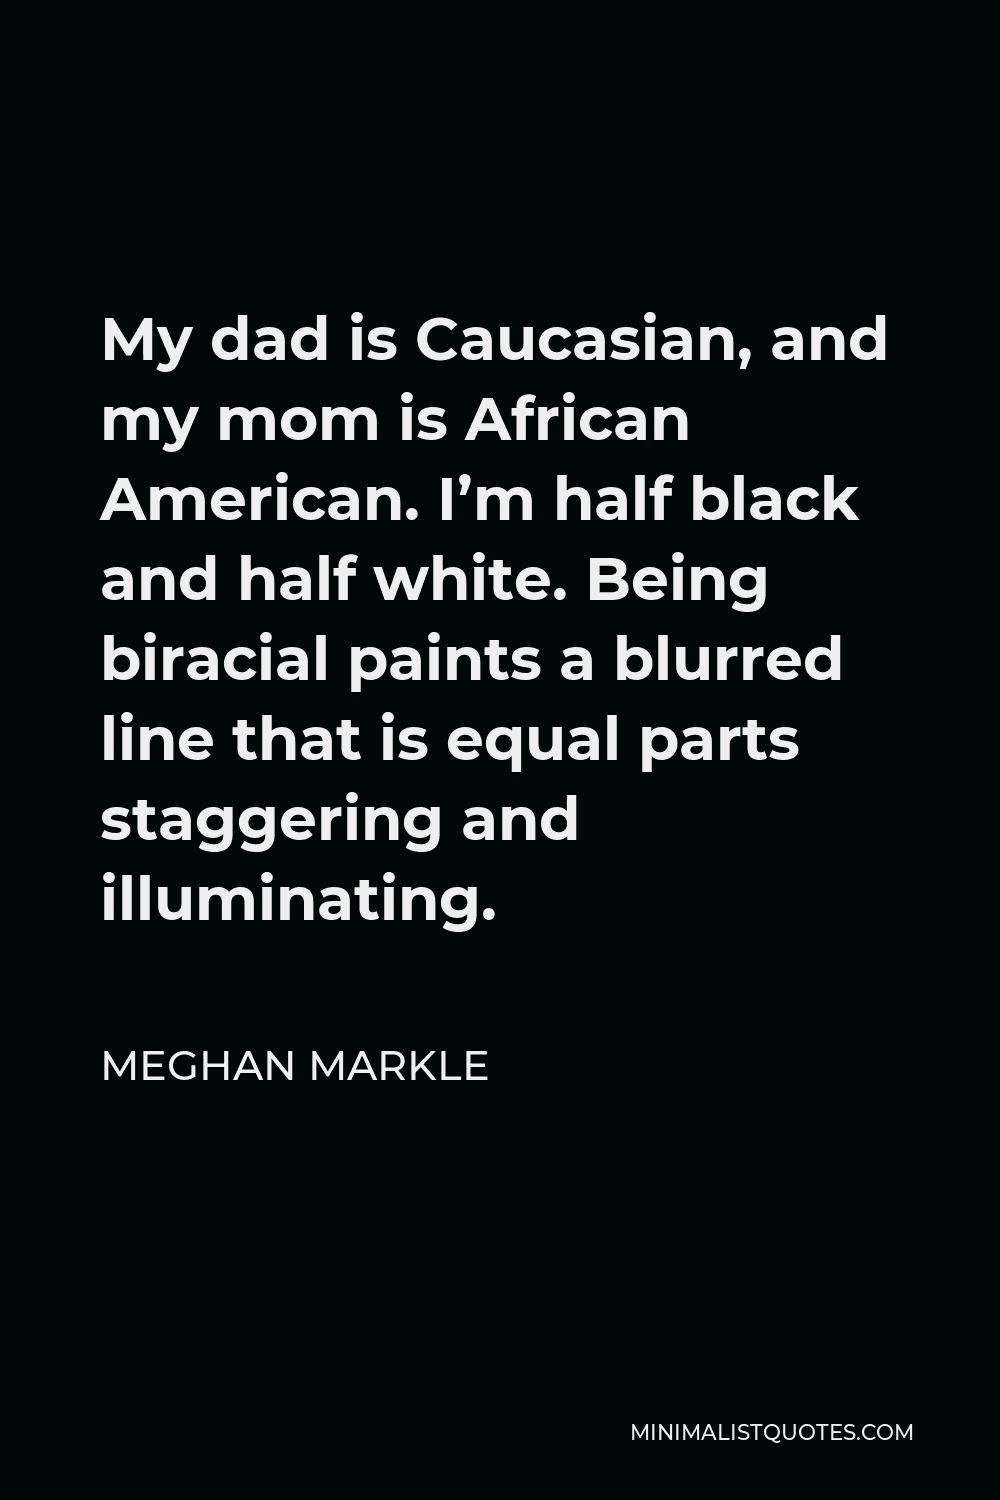 Meghan Markle Quote - My dad is Caucasian, and my mom is African American. I’m half black and half white. Being biracial paints a blurred line that is equal parts staggering and illuminating.